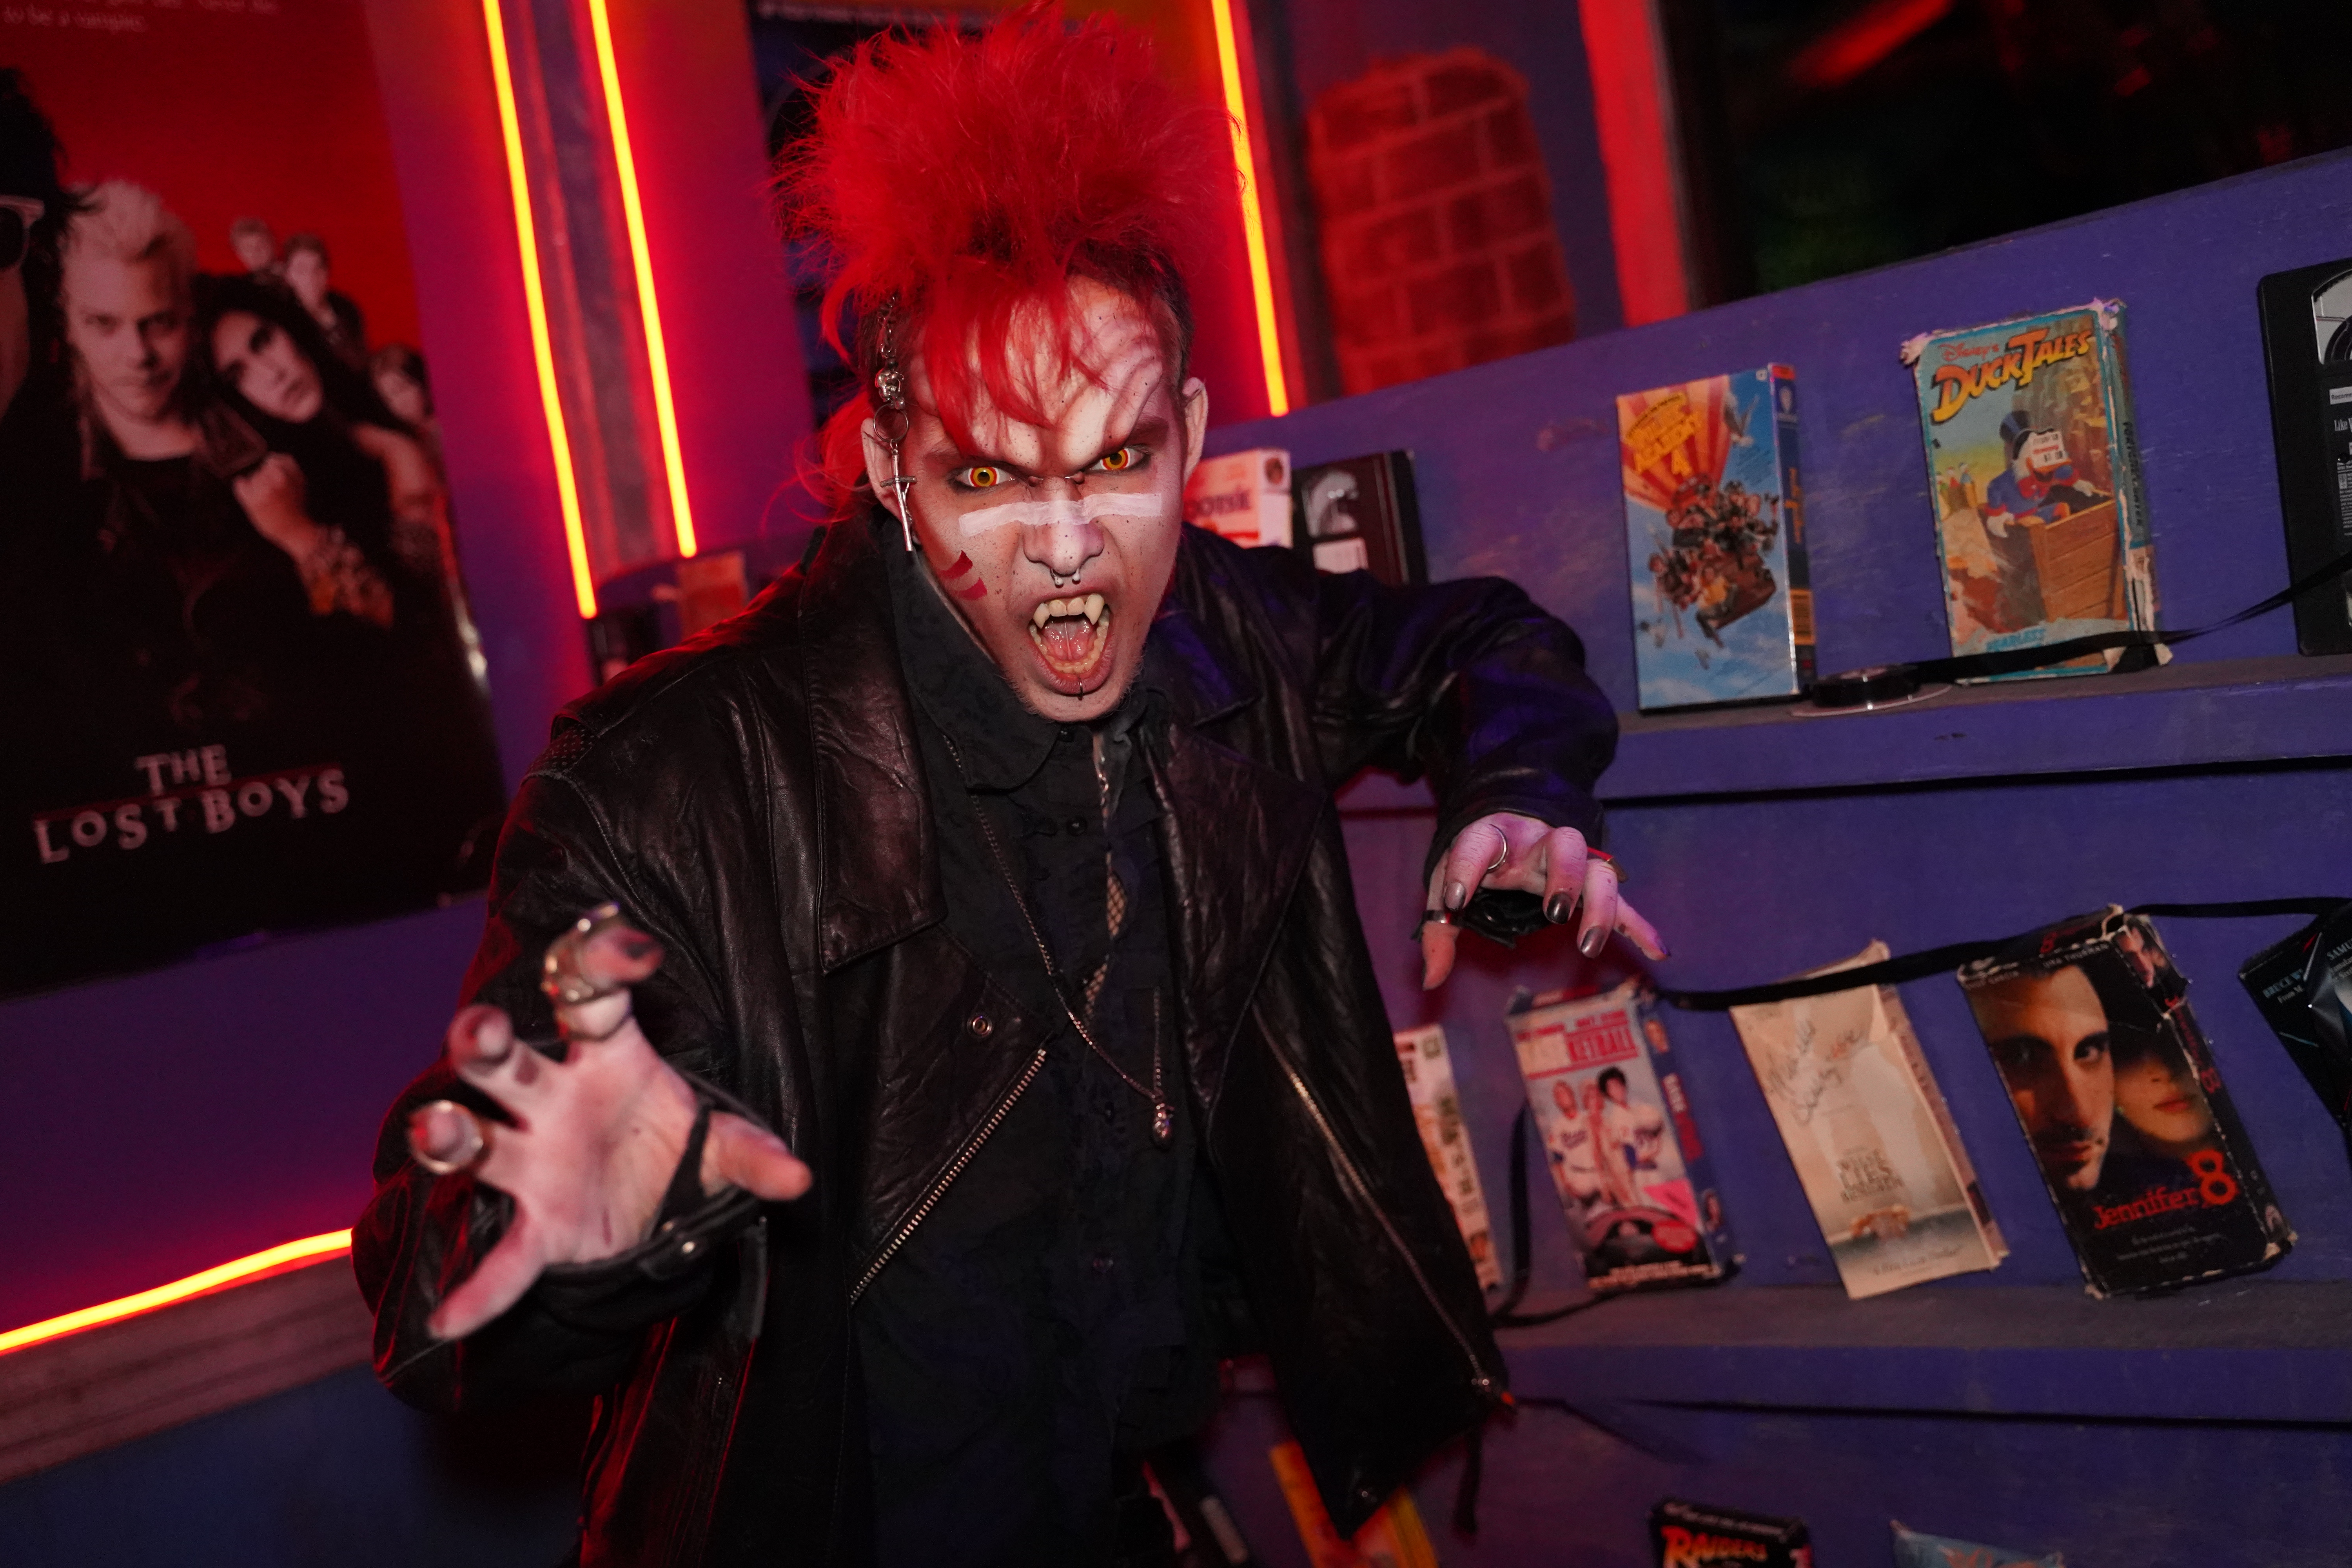 A person wearing vampire make up with a red mohawk makes a scary face in the haunted house.